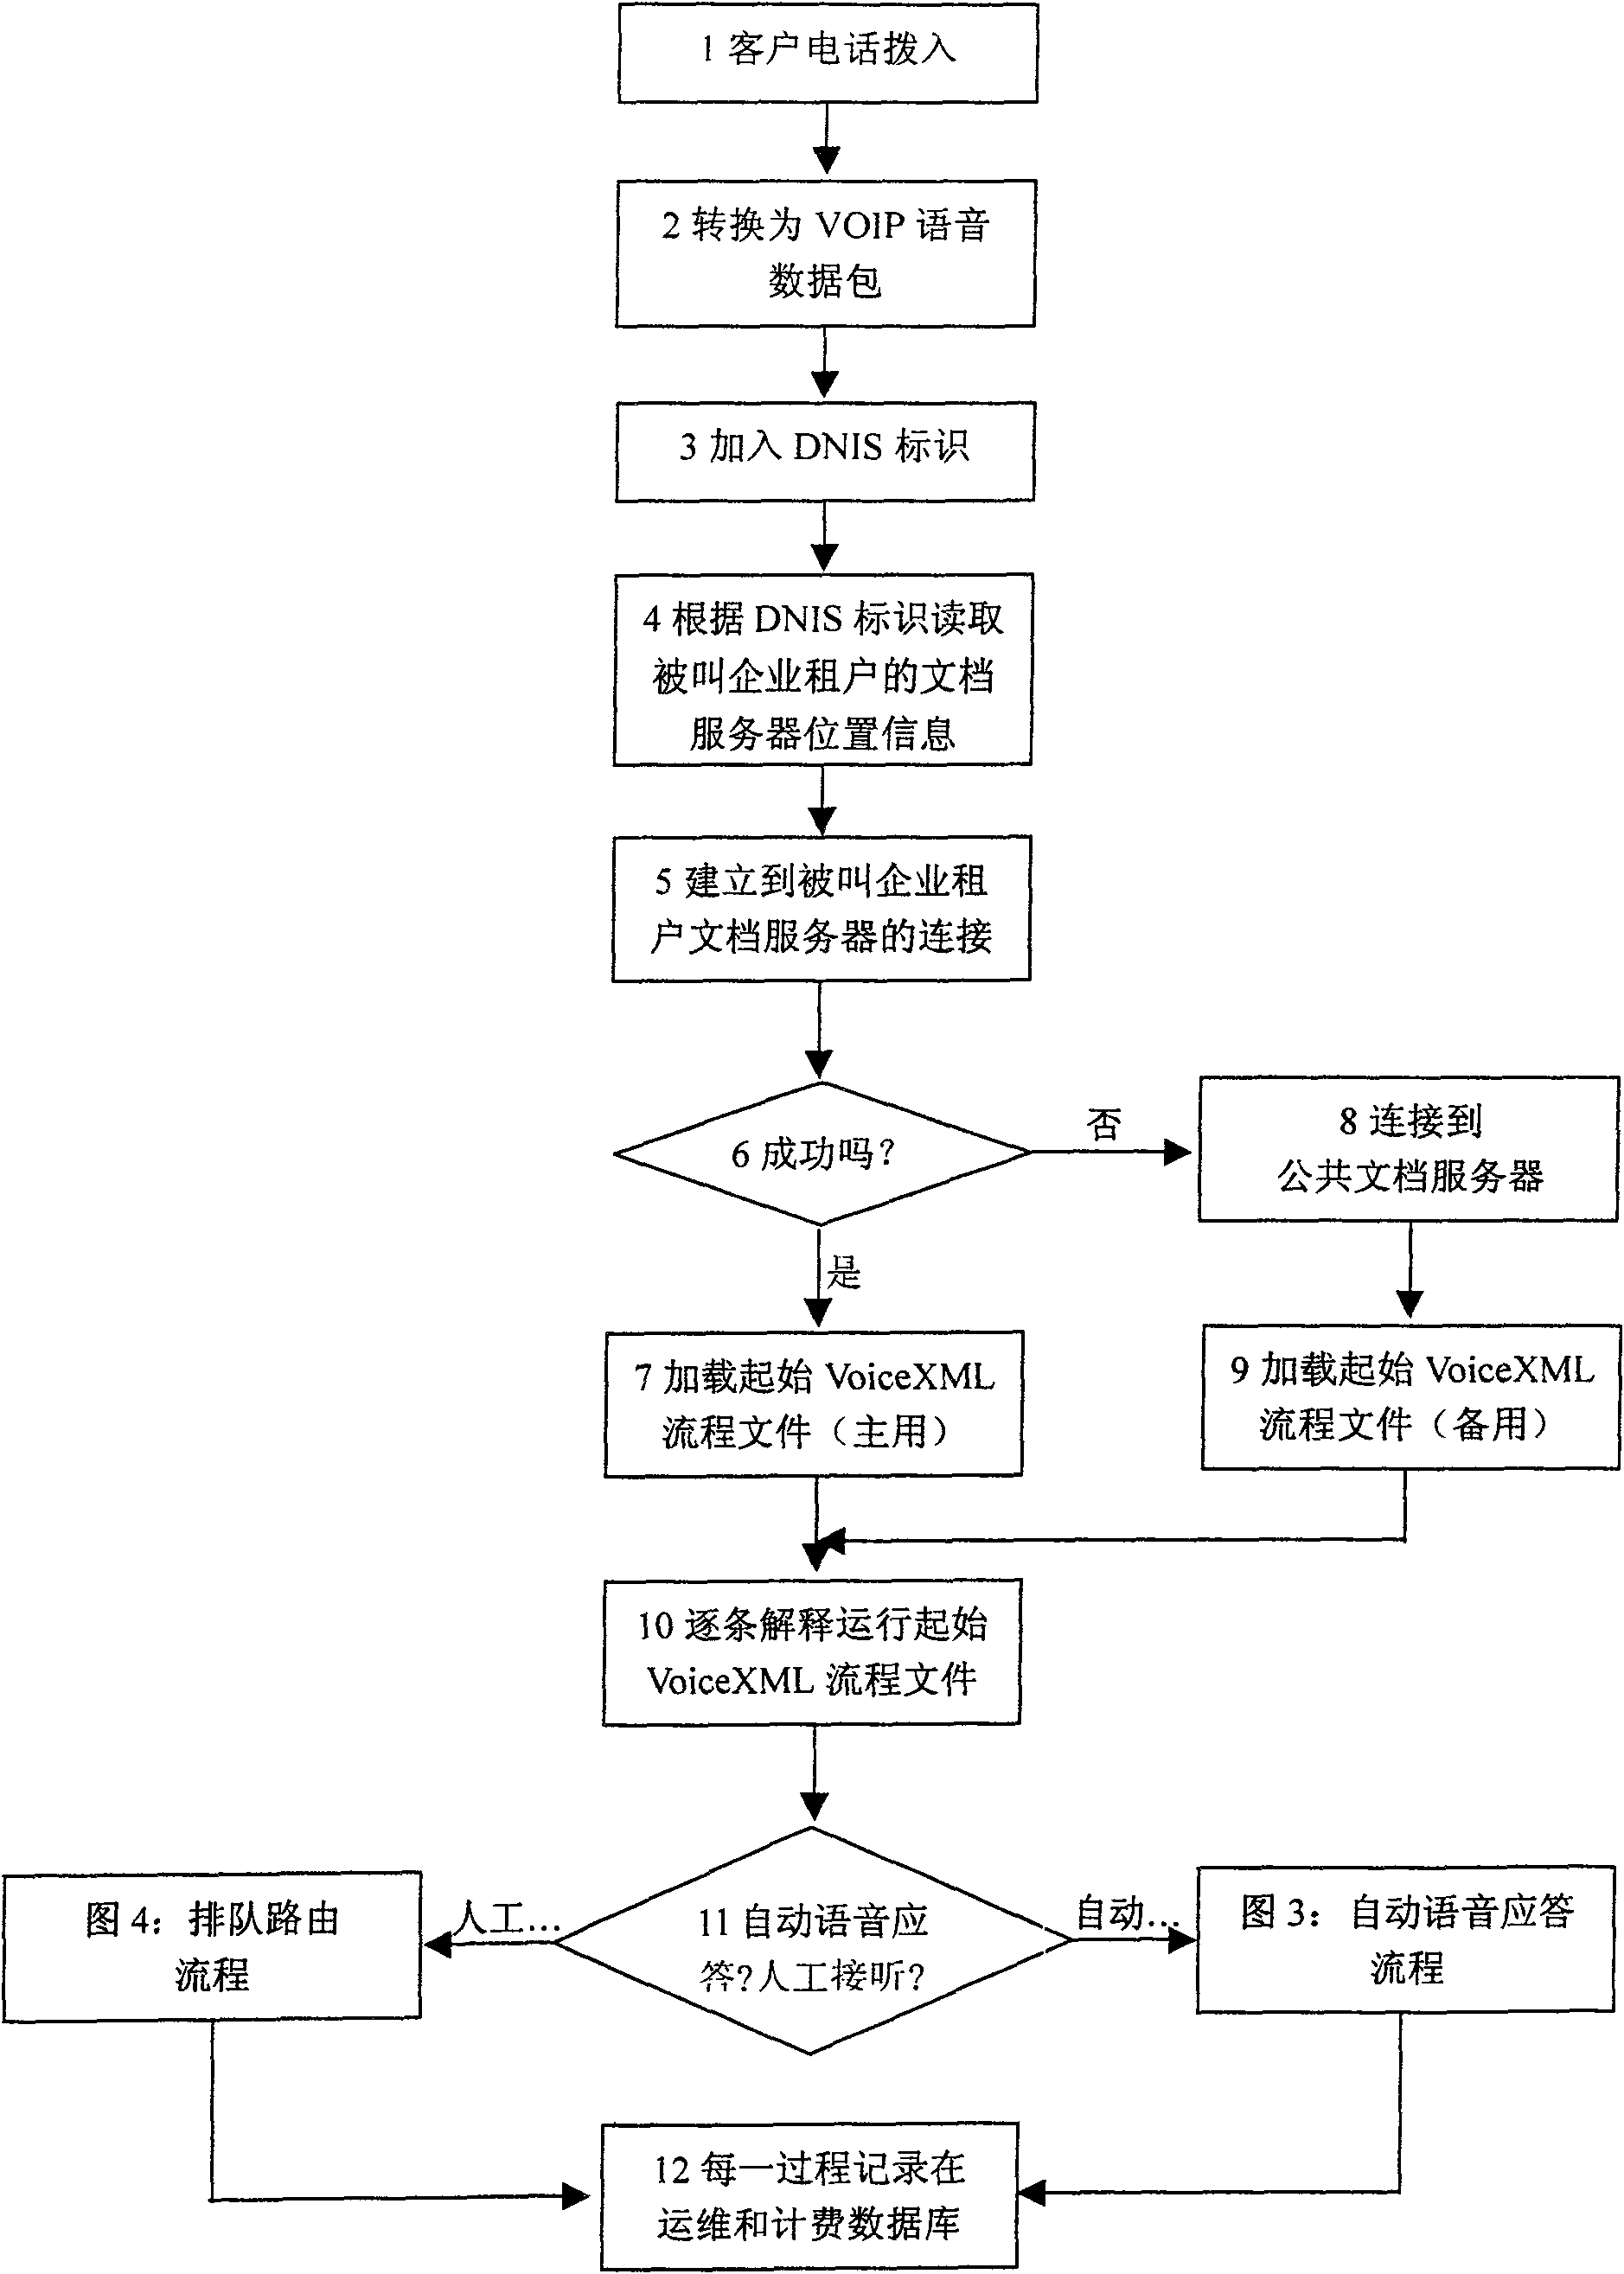 Method and system for providing public calling centre service